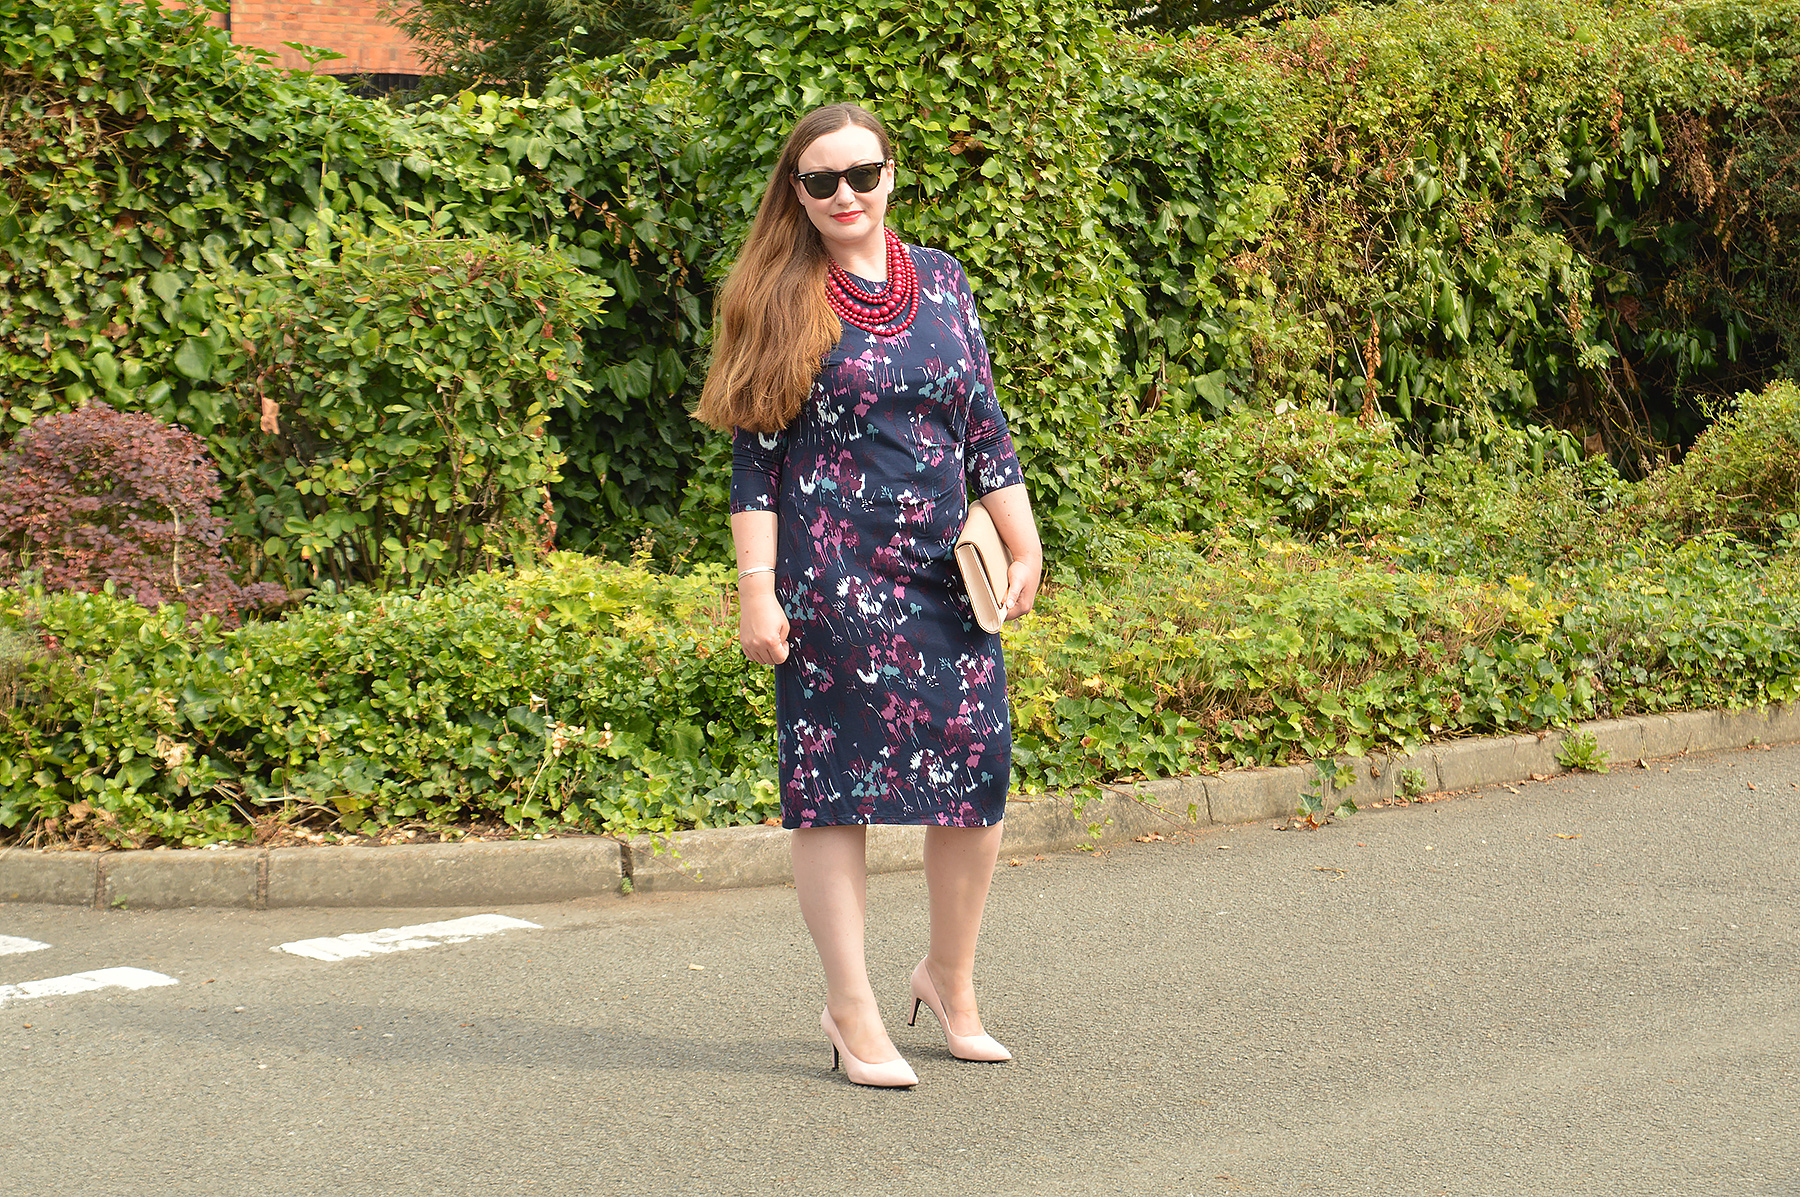 How to wear a floral dress in the autumn